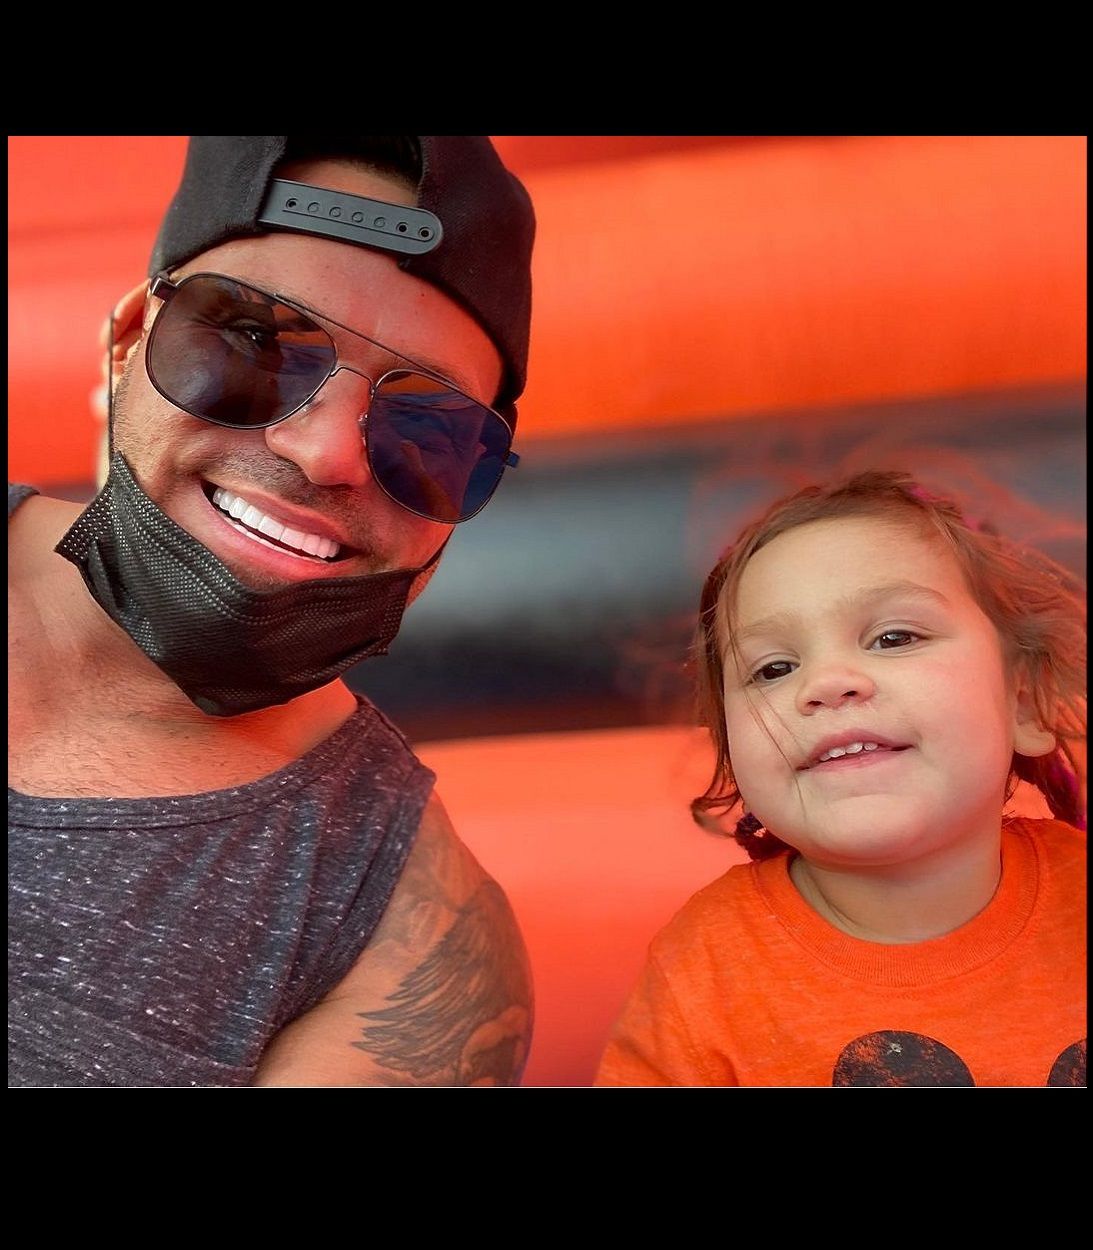 Ronnie Ortiz-Magro hanging with his daughter